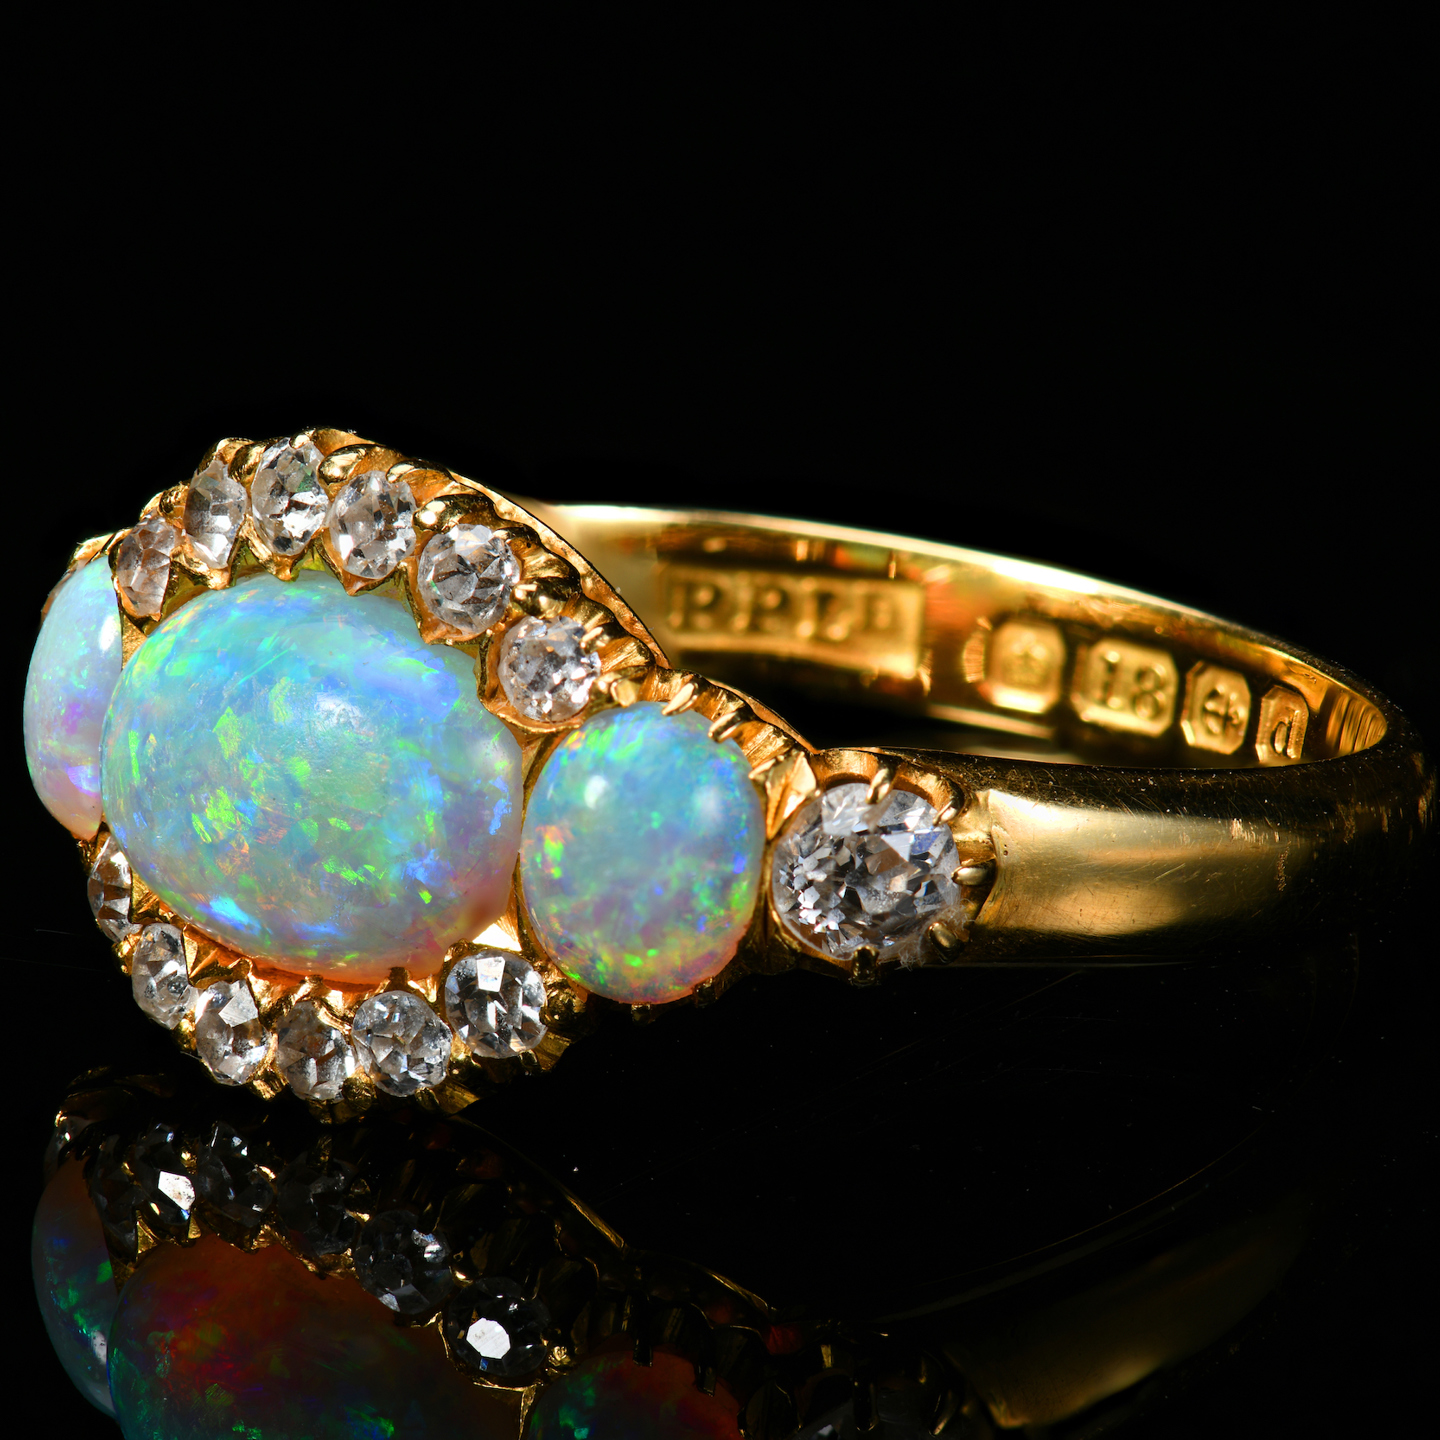 An 18Ct Gold Ring Set With Three Opals And Old Cut Diamonds. Sold For £1,100